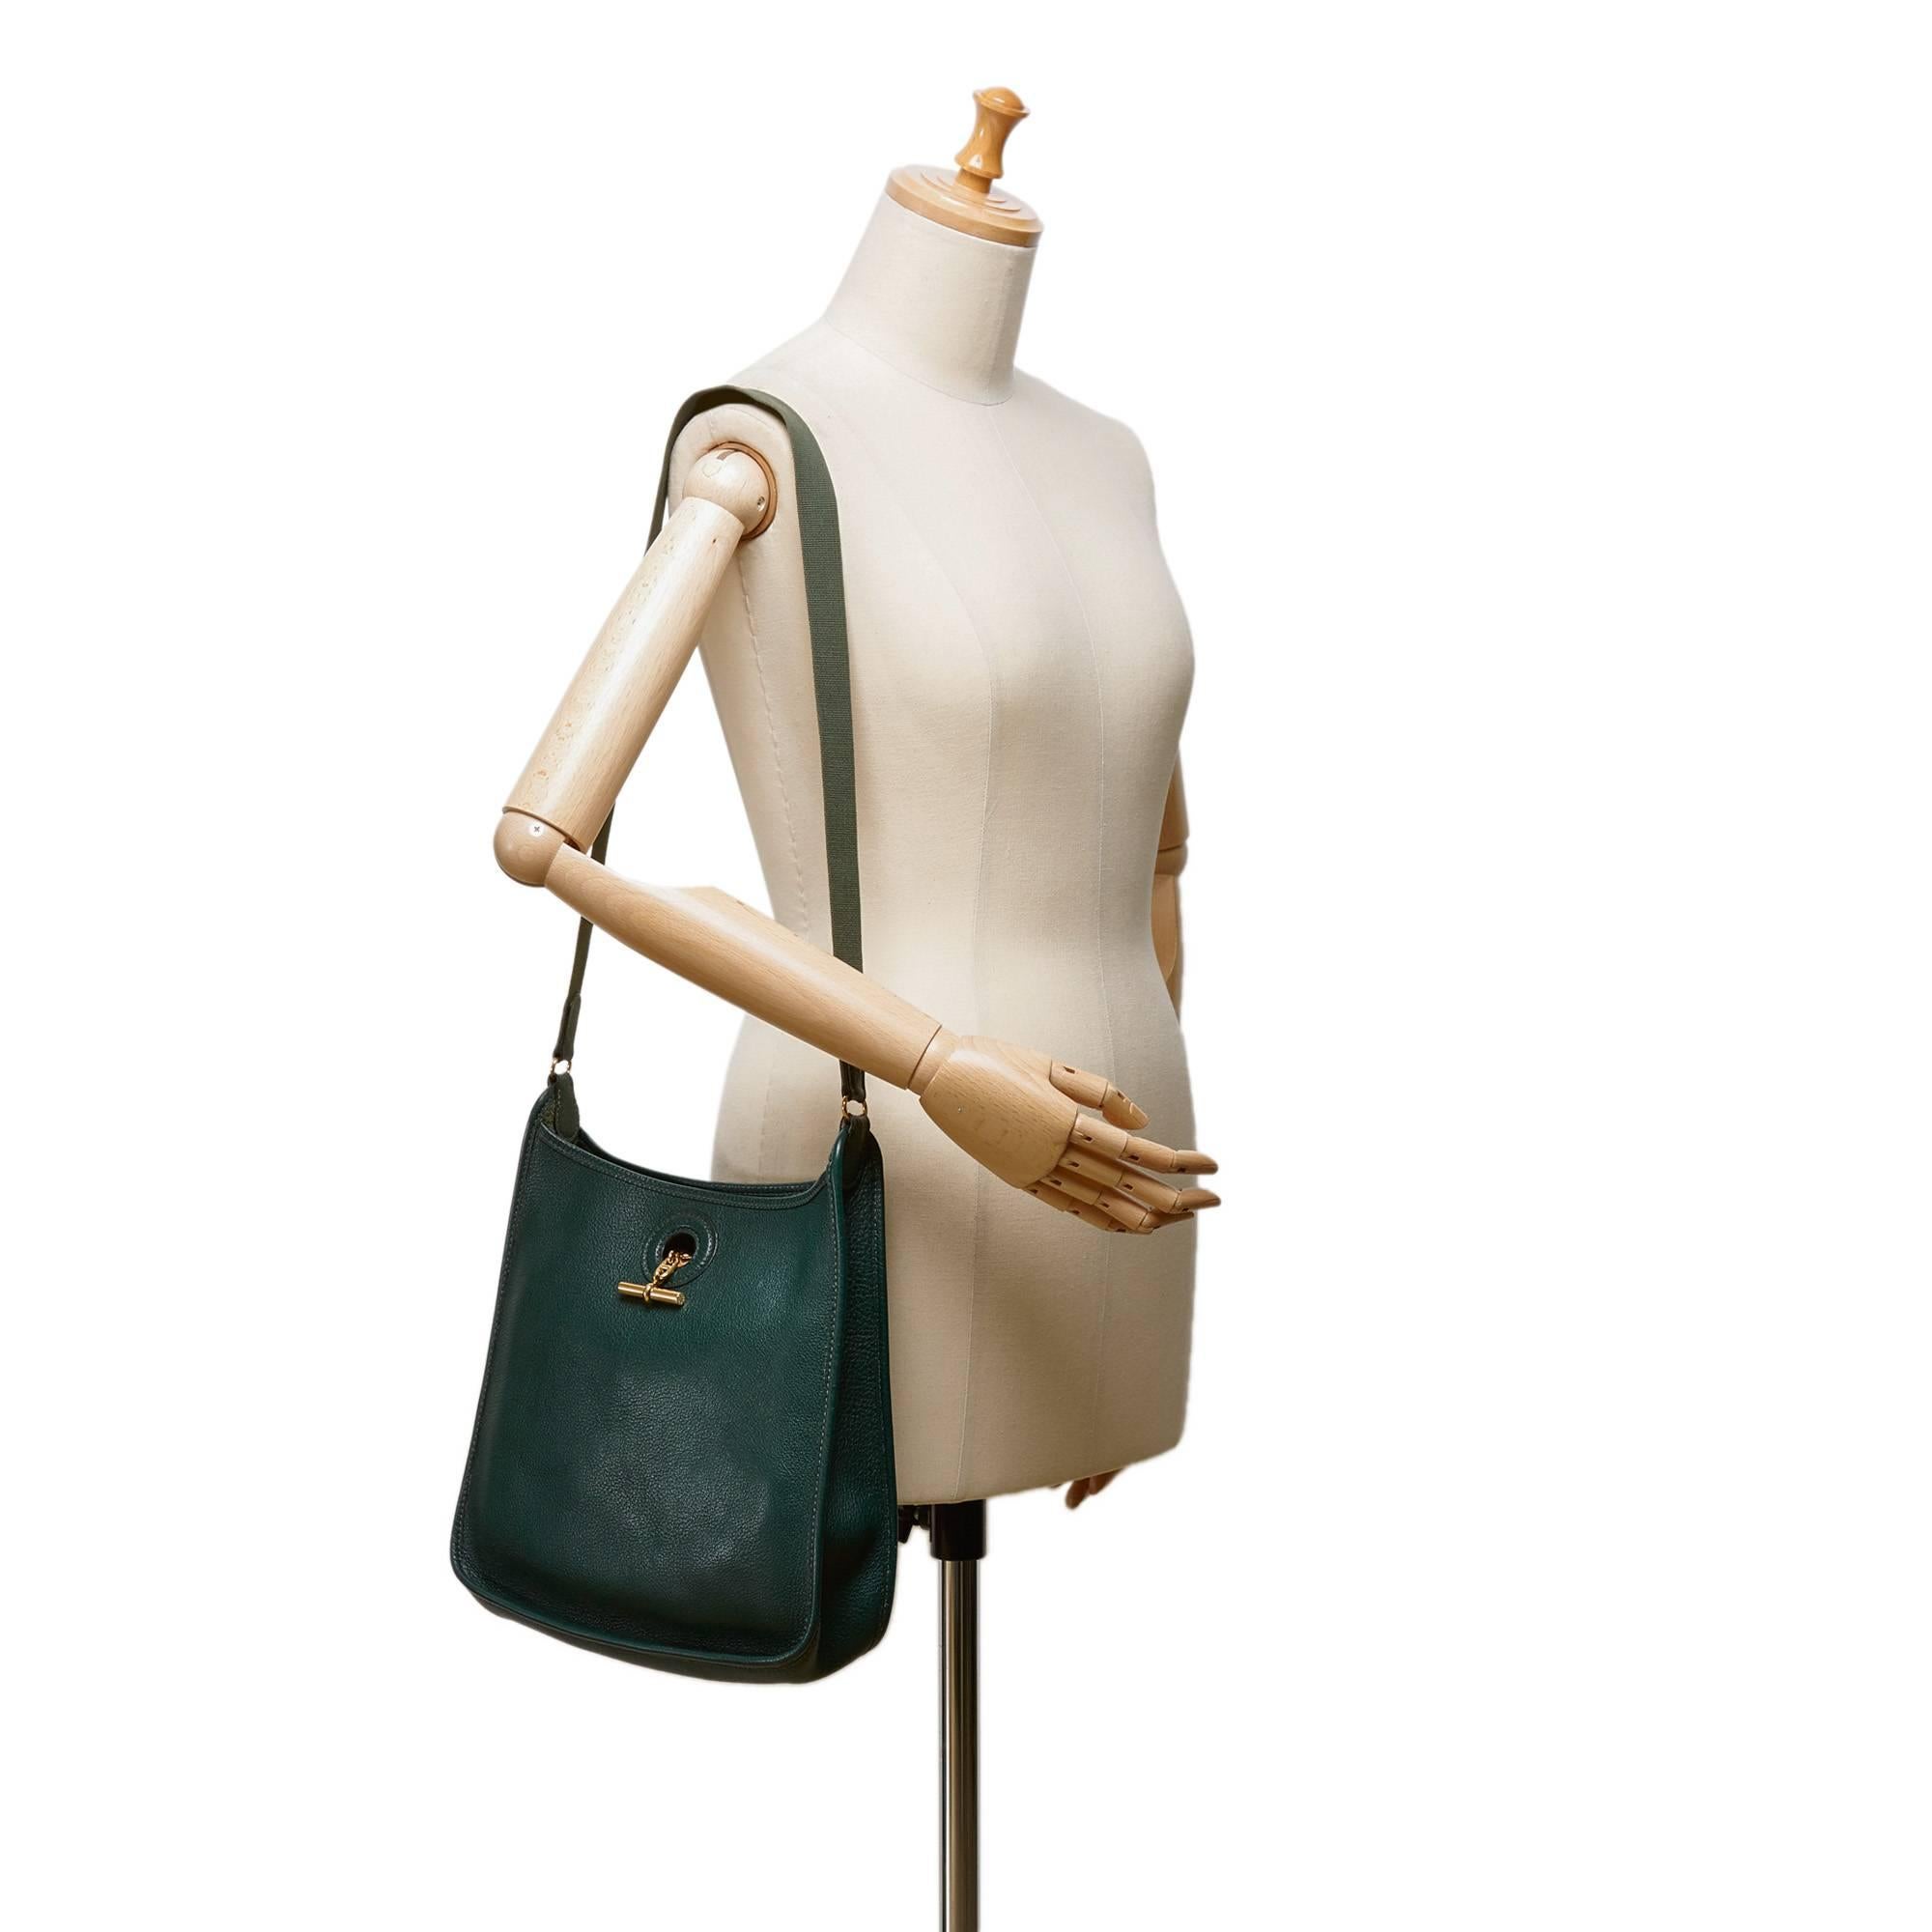 - Hermes green leather Vespa Pm shoulder strap bag.  

- Featuring a top bar and ring closure.

- An interior slip pocket.

- Length: 28cm. Height:  27cm. Width: 7.5cm. Shoulder Strap: 47cm. 

- Included: Dust bag. 

- Condition: Excellent. We would